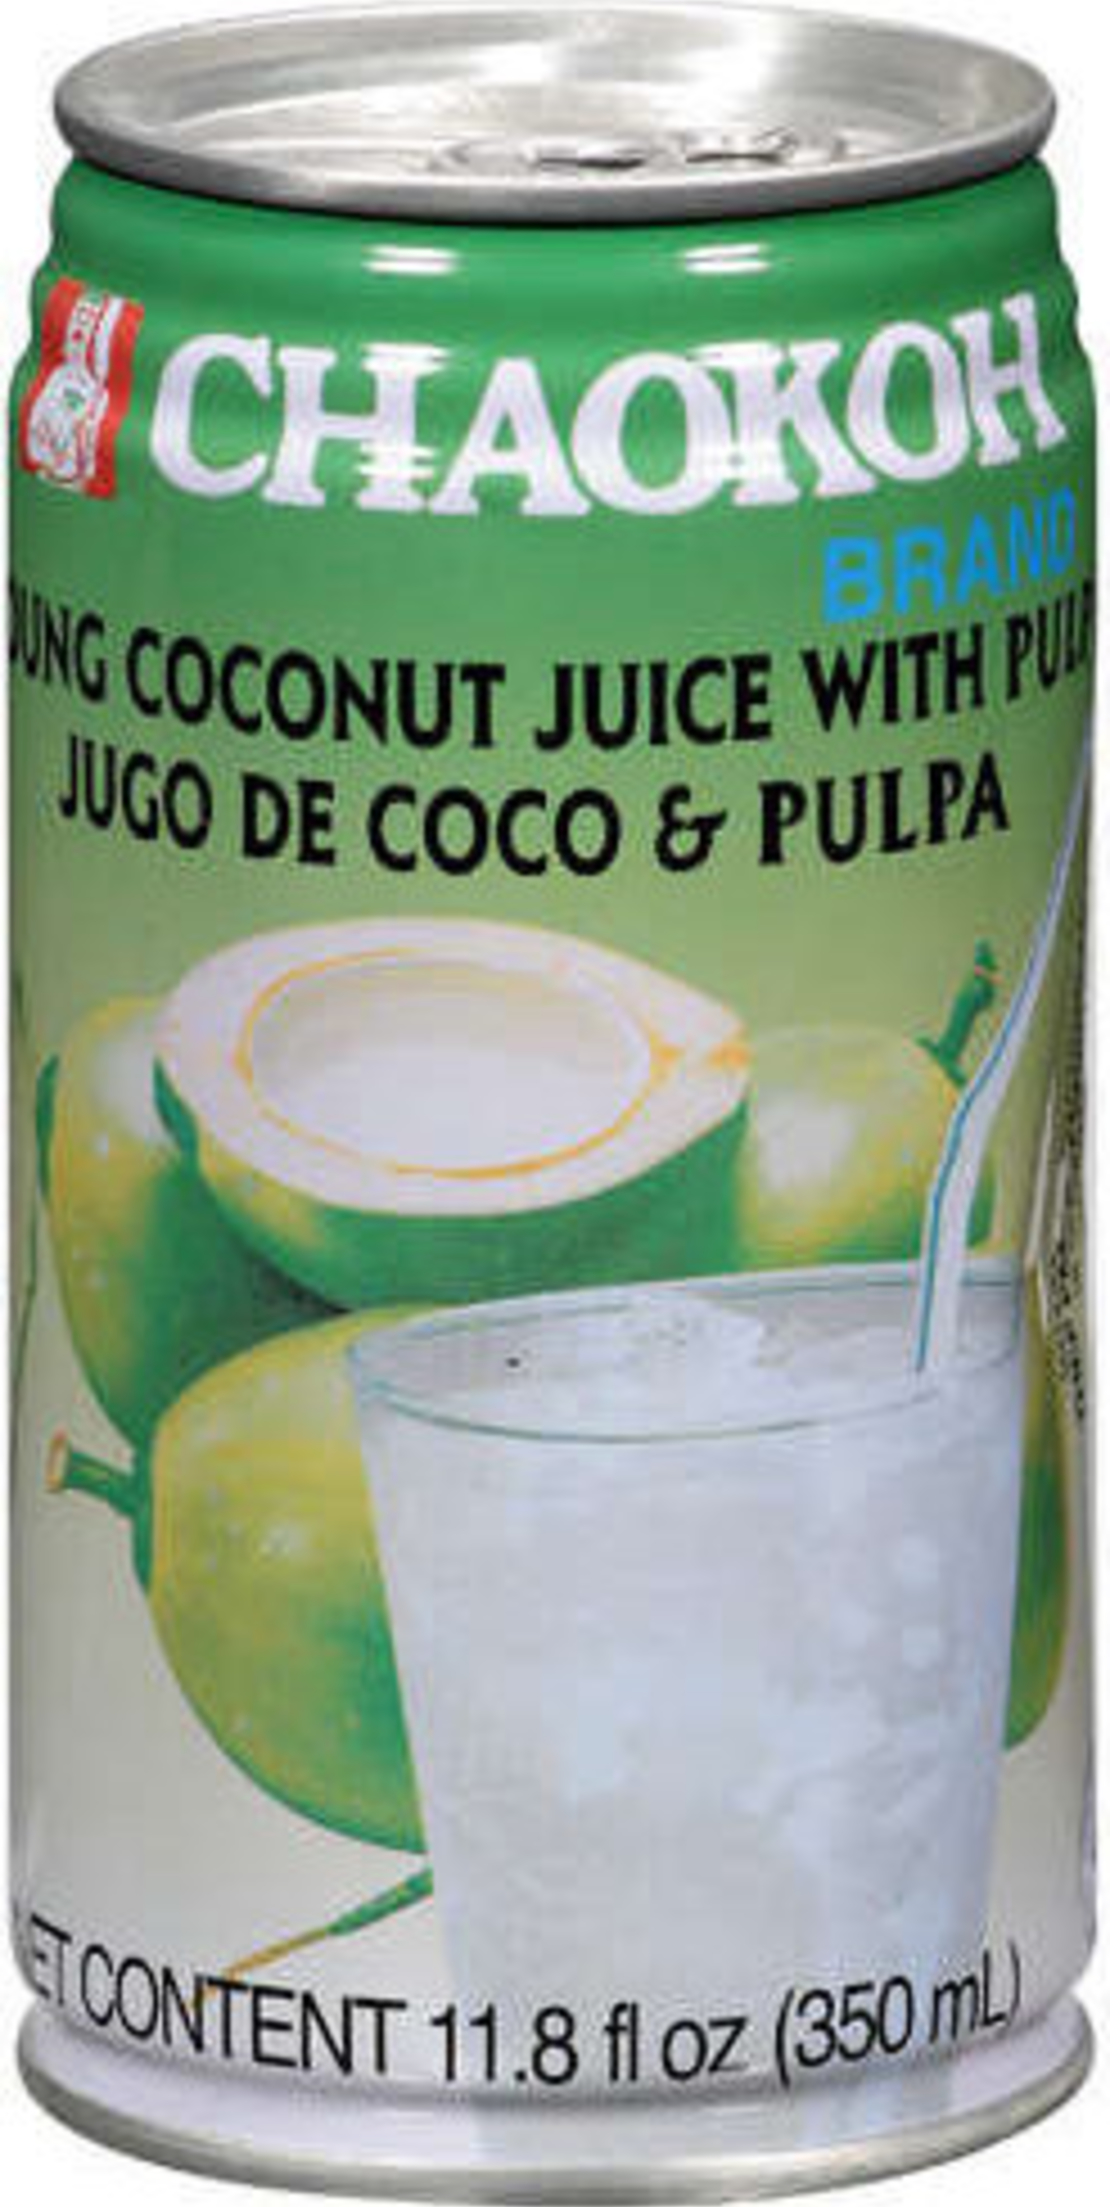 Buko - Chaokoh - Young Coconut Juice with Pulp 350ml